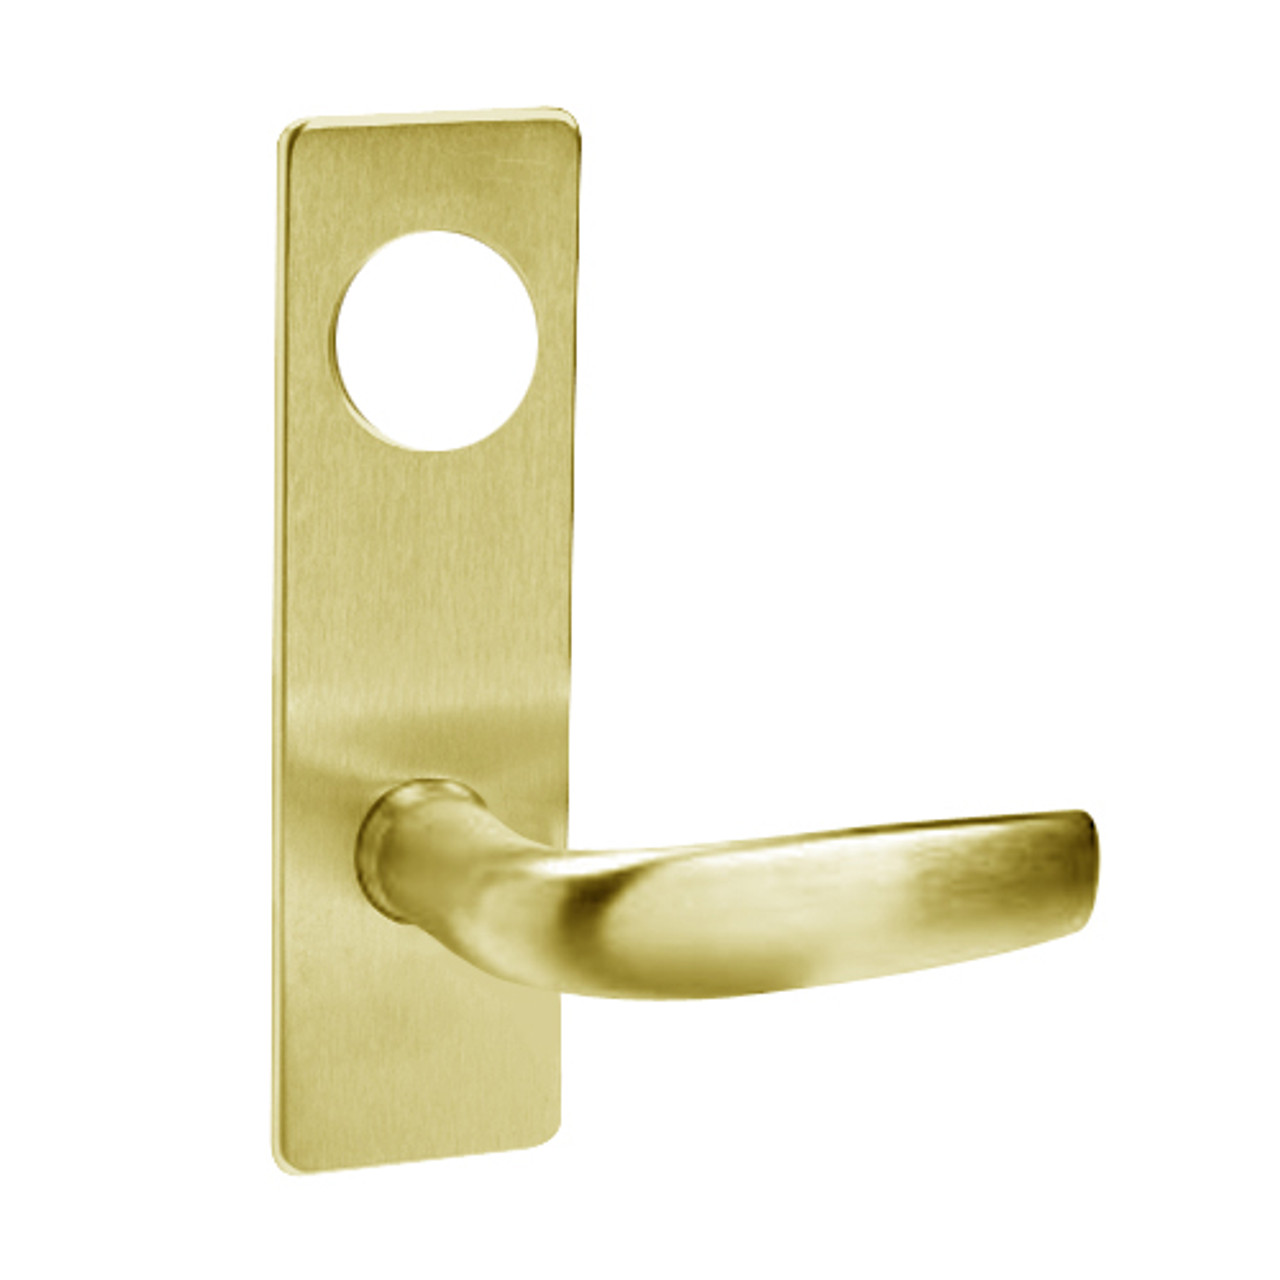 ML2024-CSN-605 Corbin Russwin ML2000 Series Mortise Entrance Locksets with Citation Lever and Deadbolt in Bright Brass